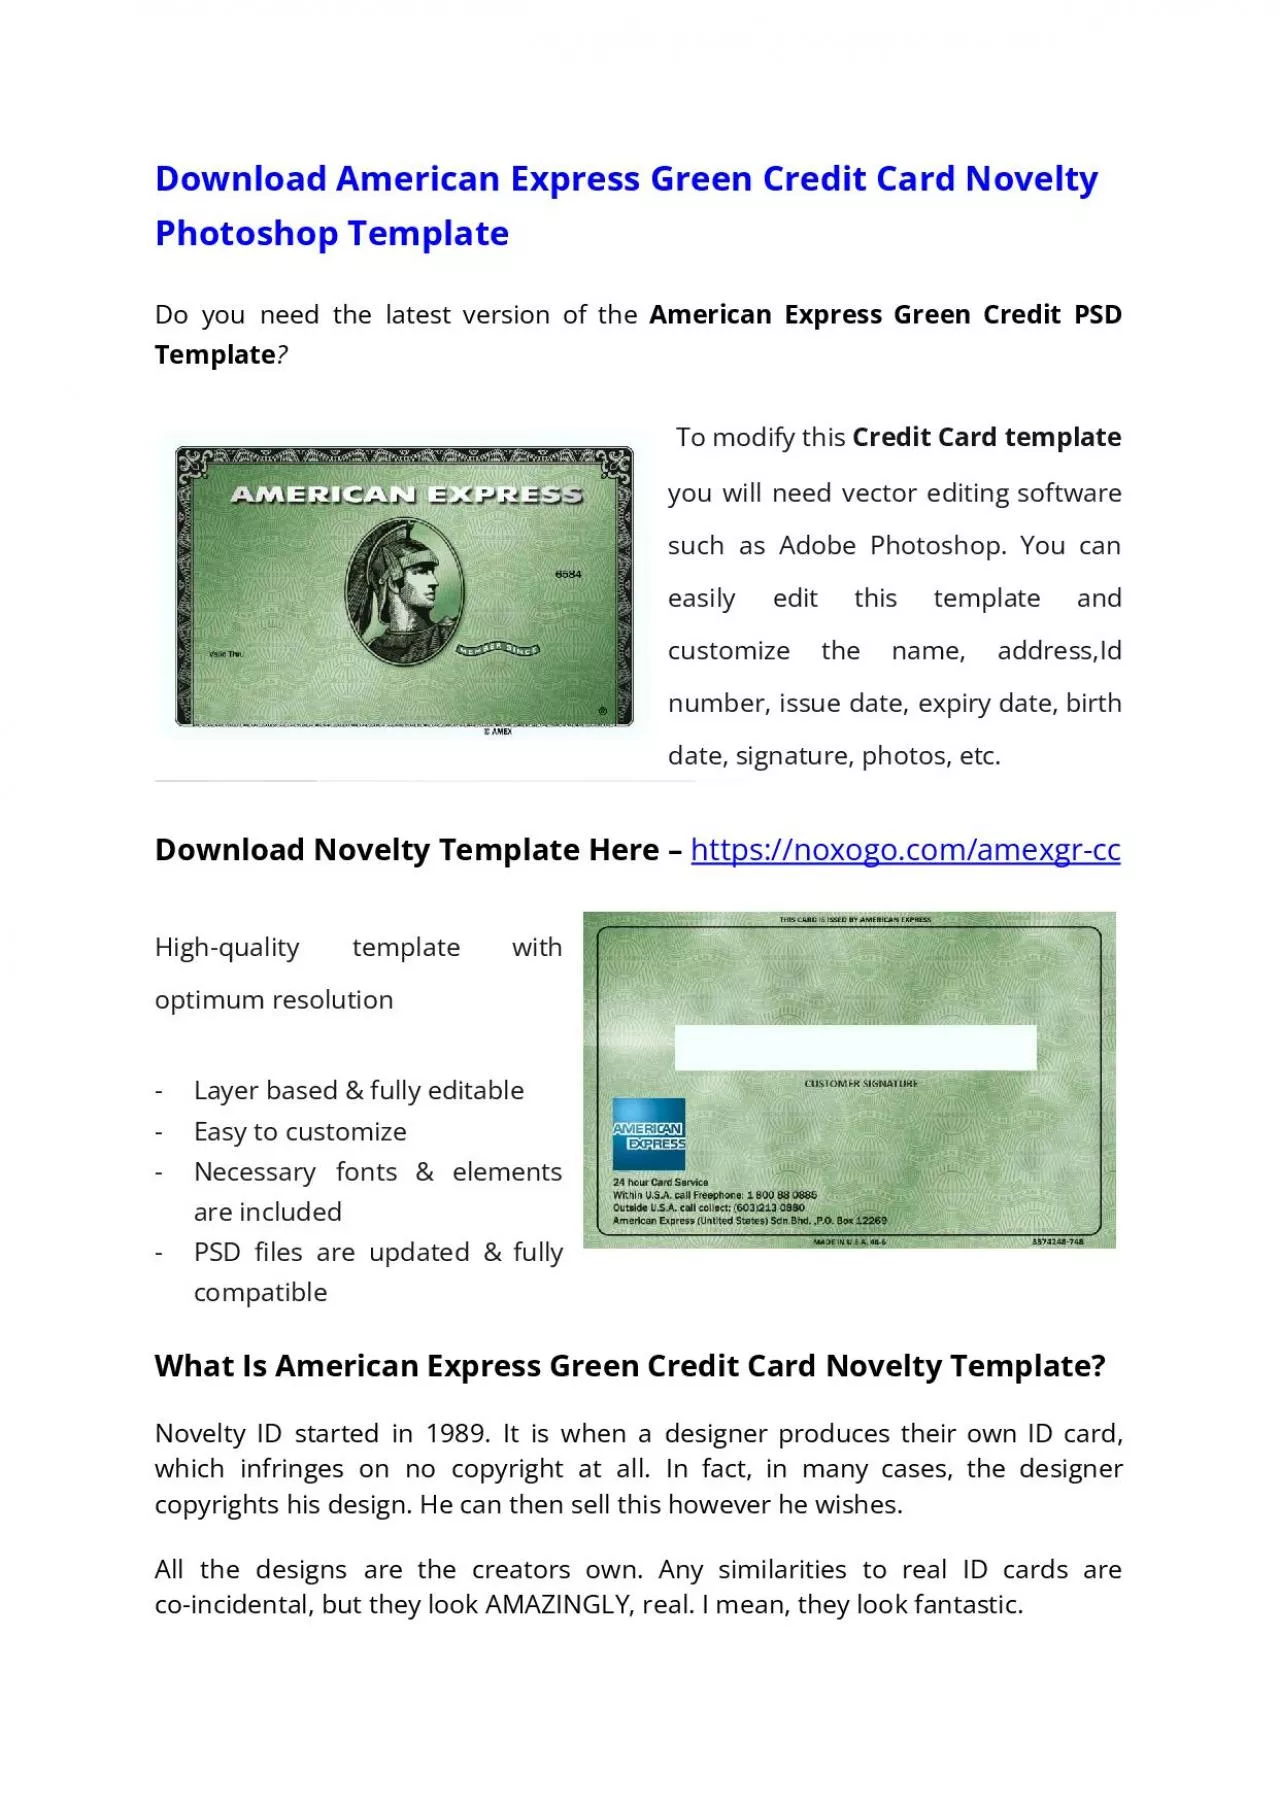 American Express Green Credit Card PSD Template – Download Photoshop File